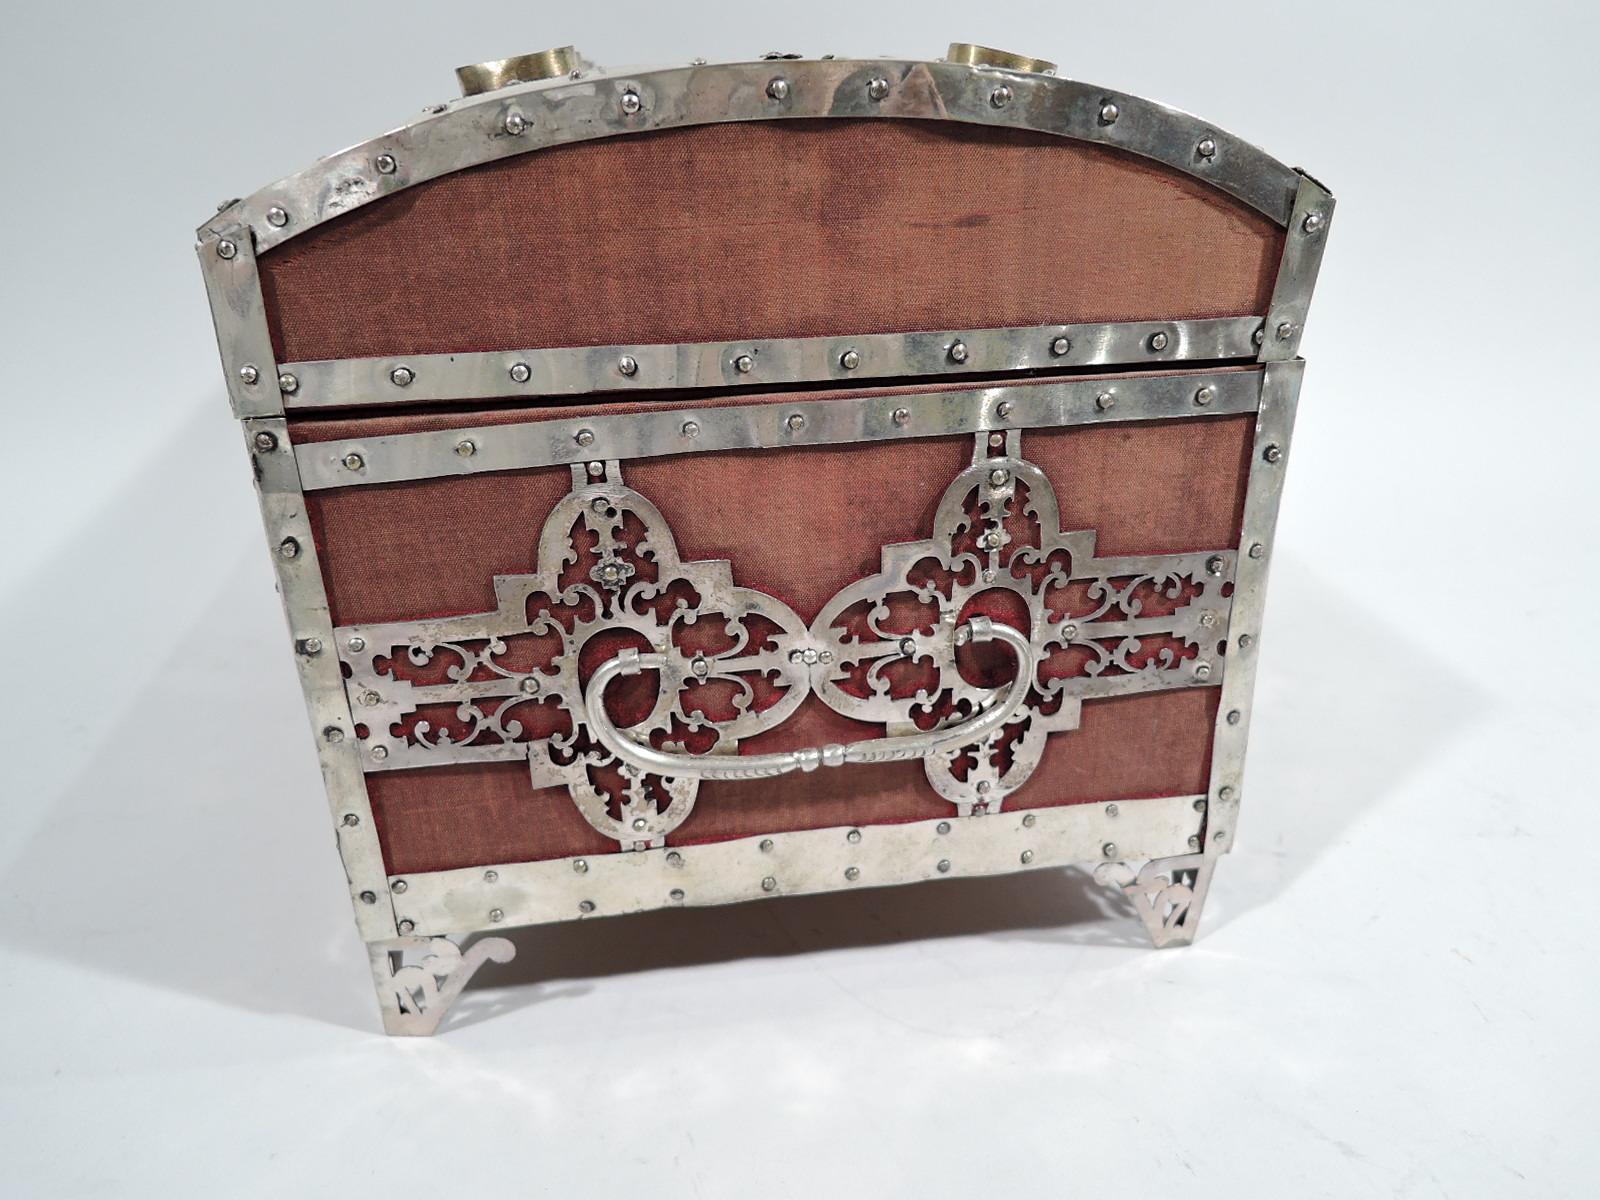 Antiquarian wood casket, 19th century. Wood box with straight sides. Cover hinged and domed. Studded metal borders and pierced tracery ornament with miniature watercolor portraits mounted to front and cover. Historic male subjects from the middle